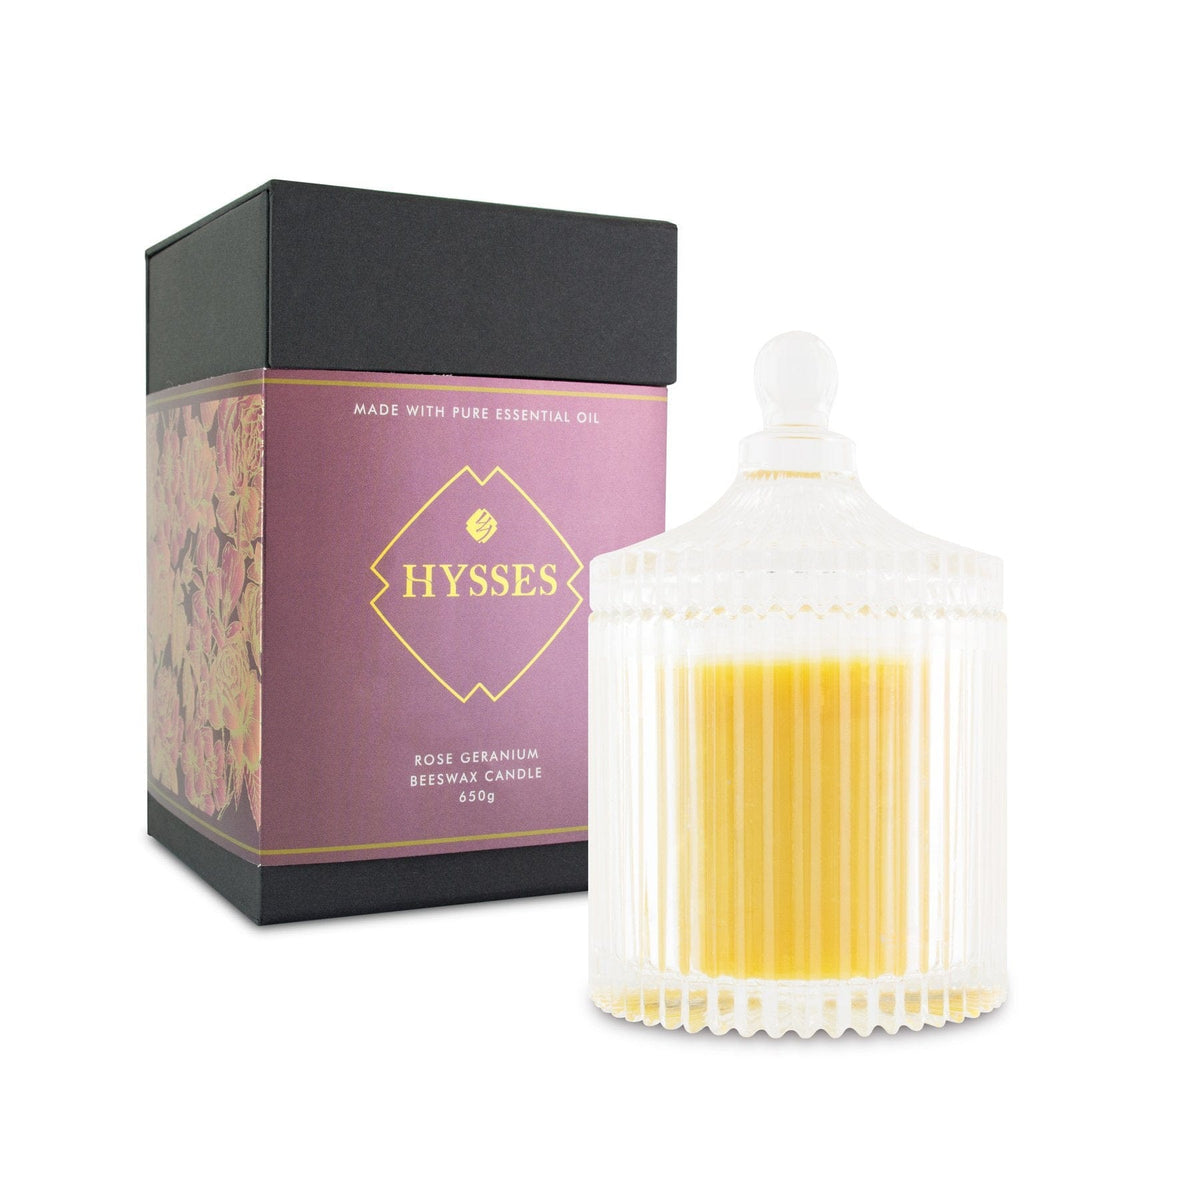 Hysses Home Scents 650g Beeswax Candle Rose Geranium